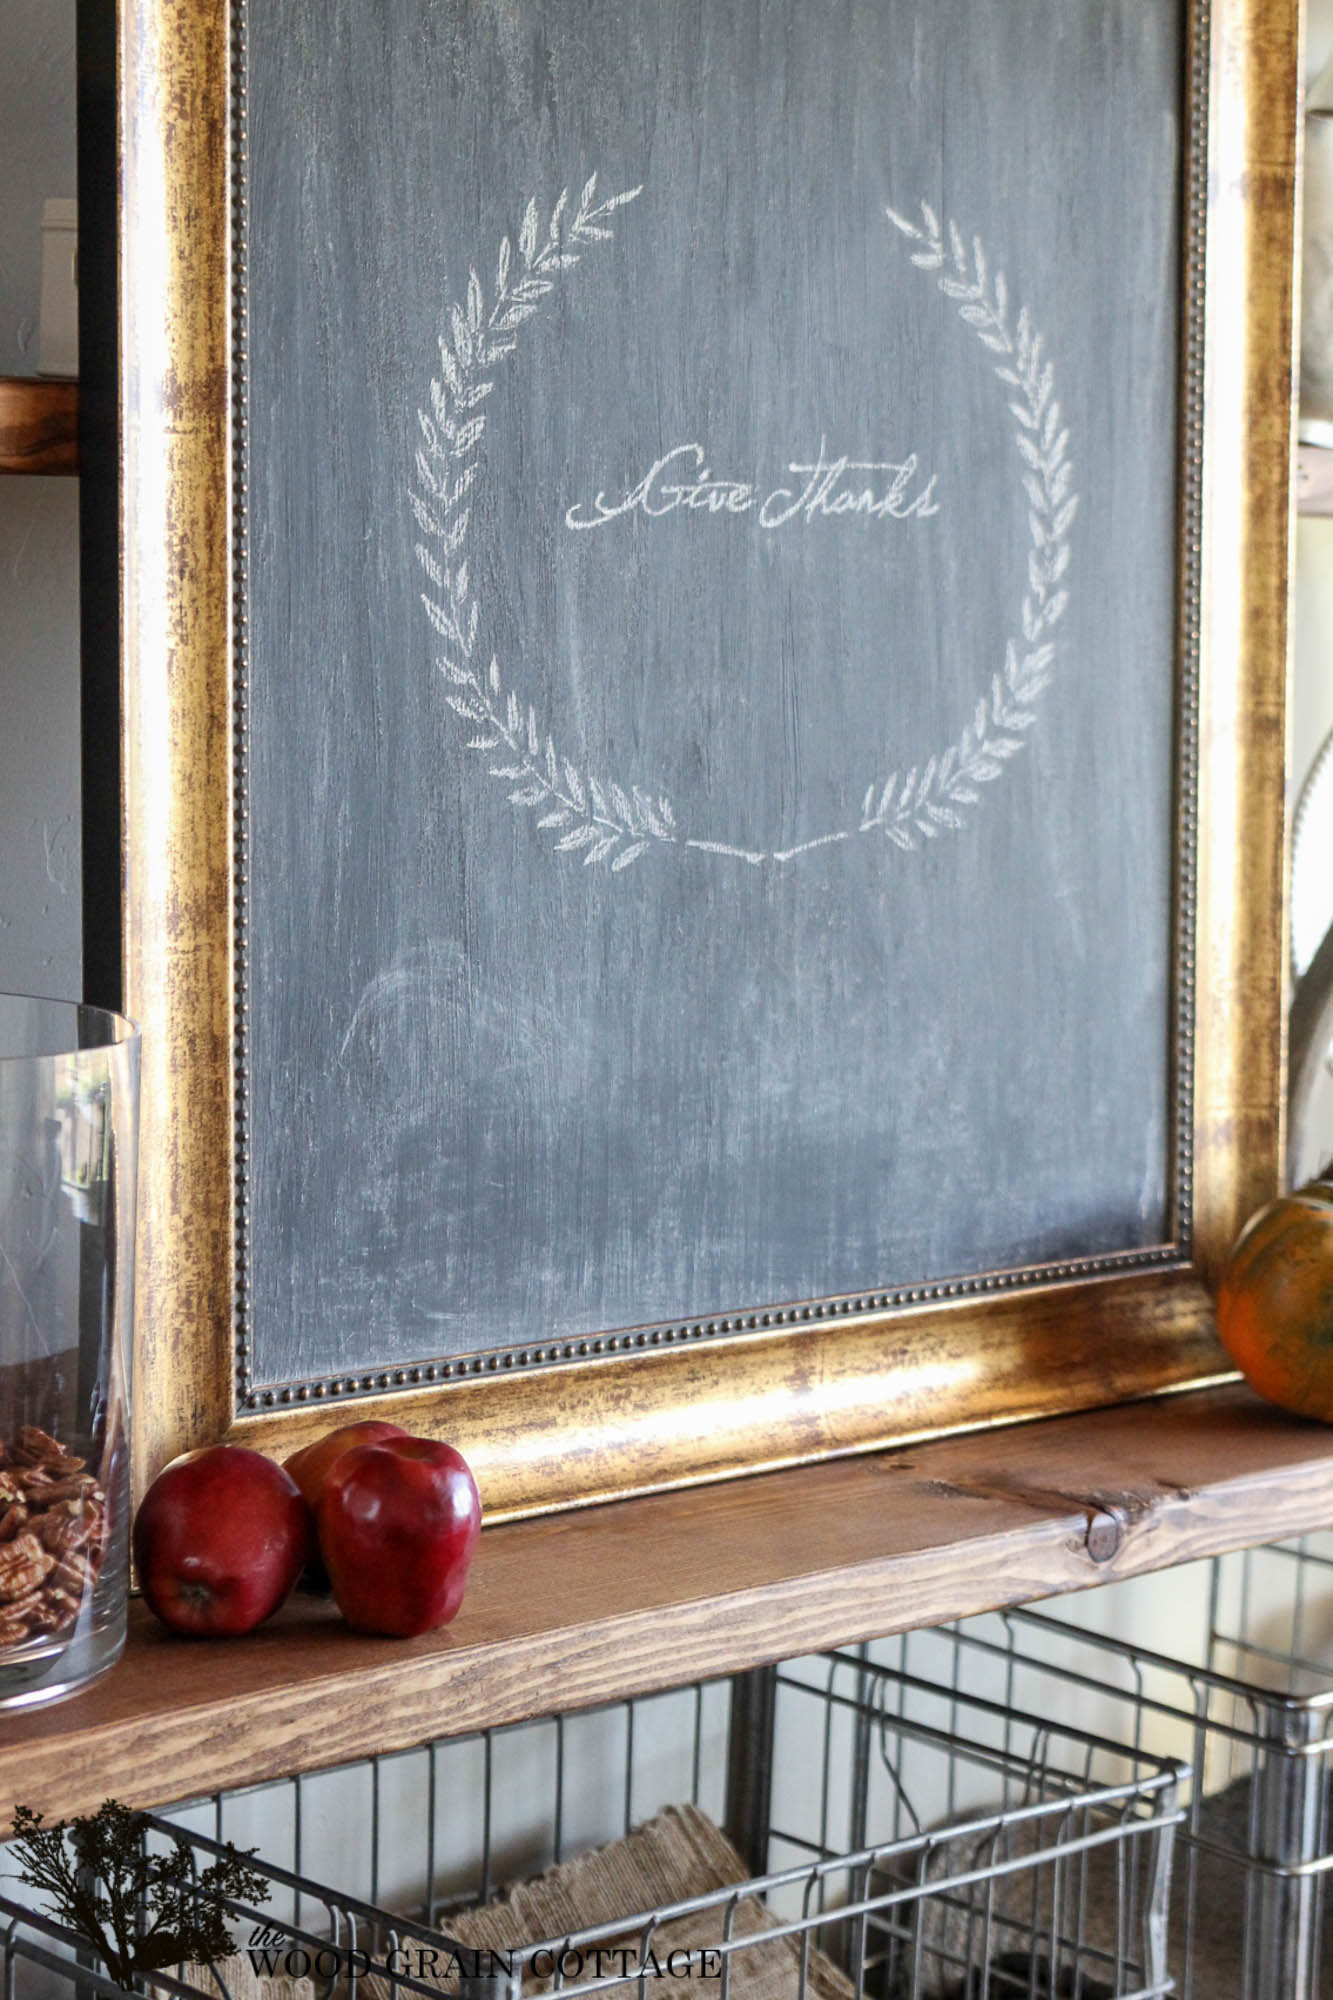 Picture Frame to Chalkboard - The Wood Grain Cottage